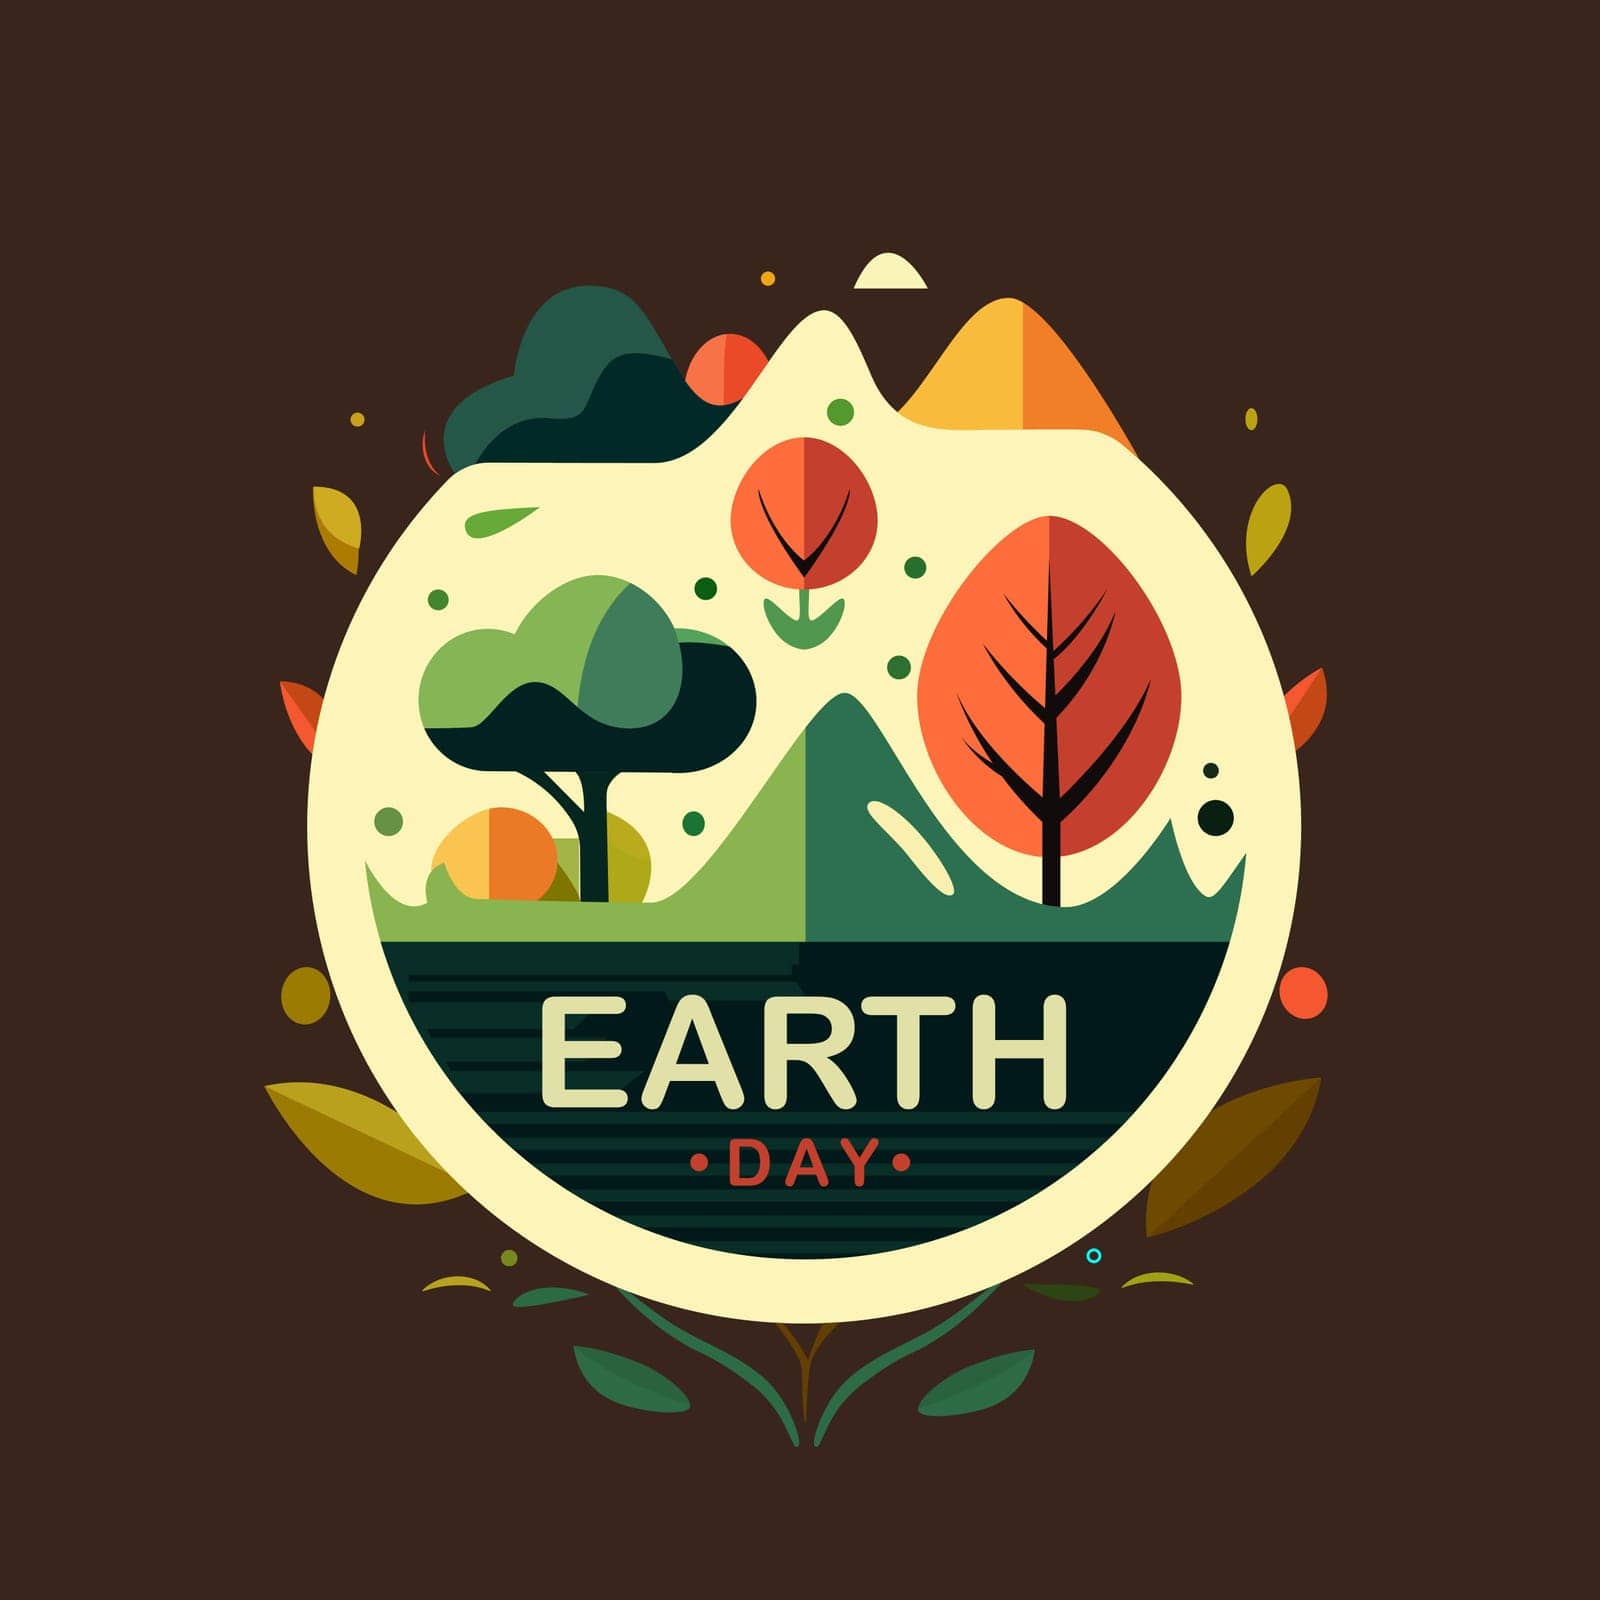 Eco Friendly Earth Day Illustrated Label. Vector Illustration